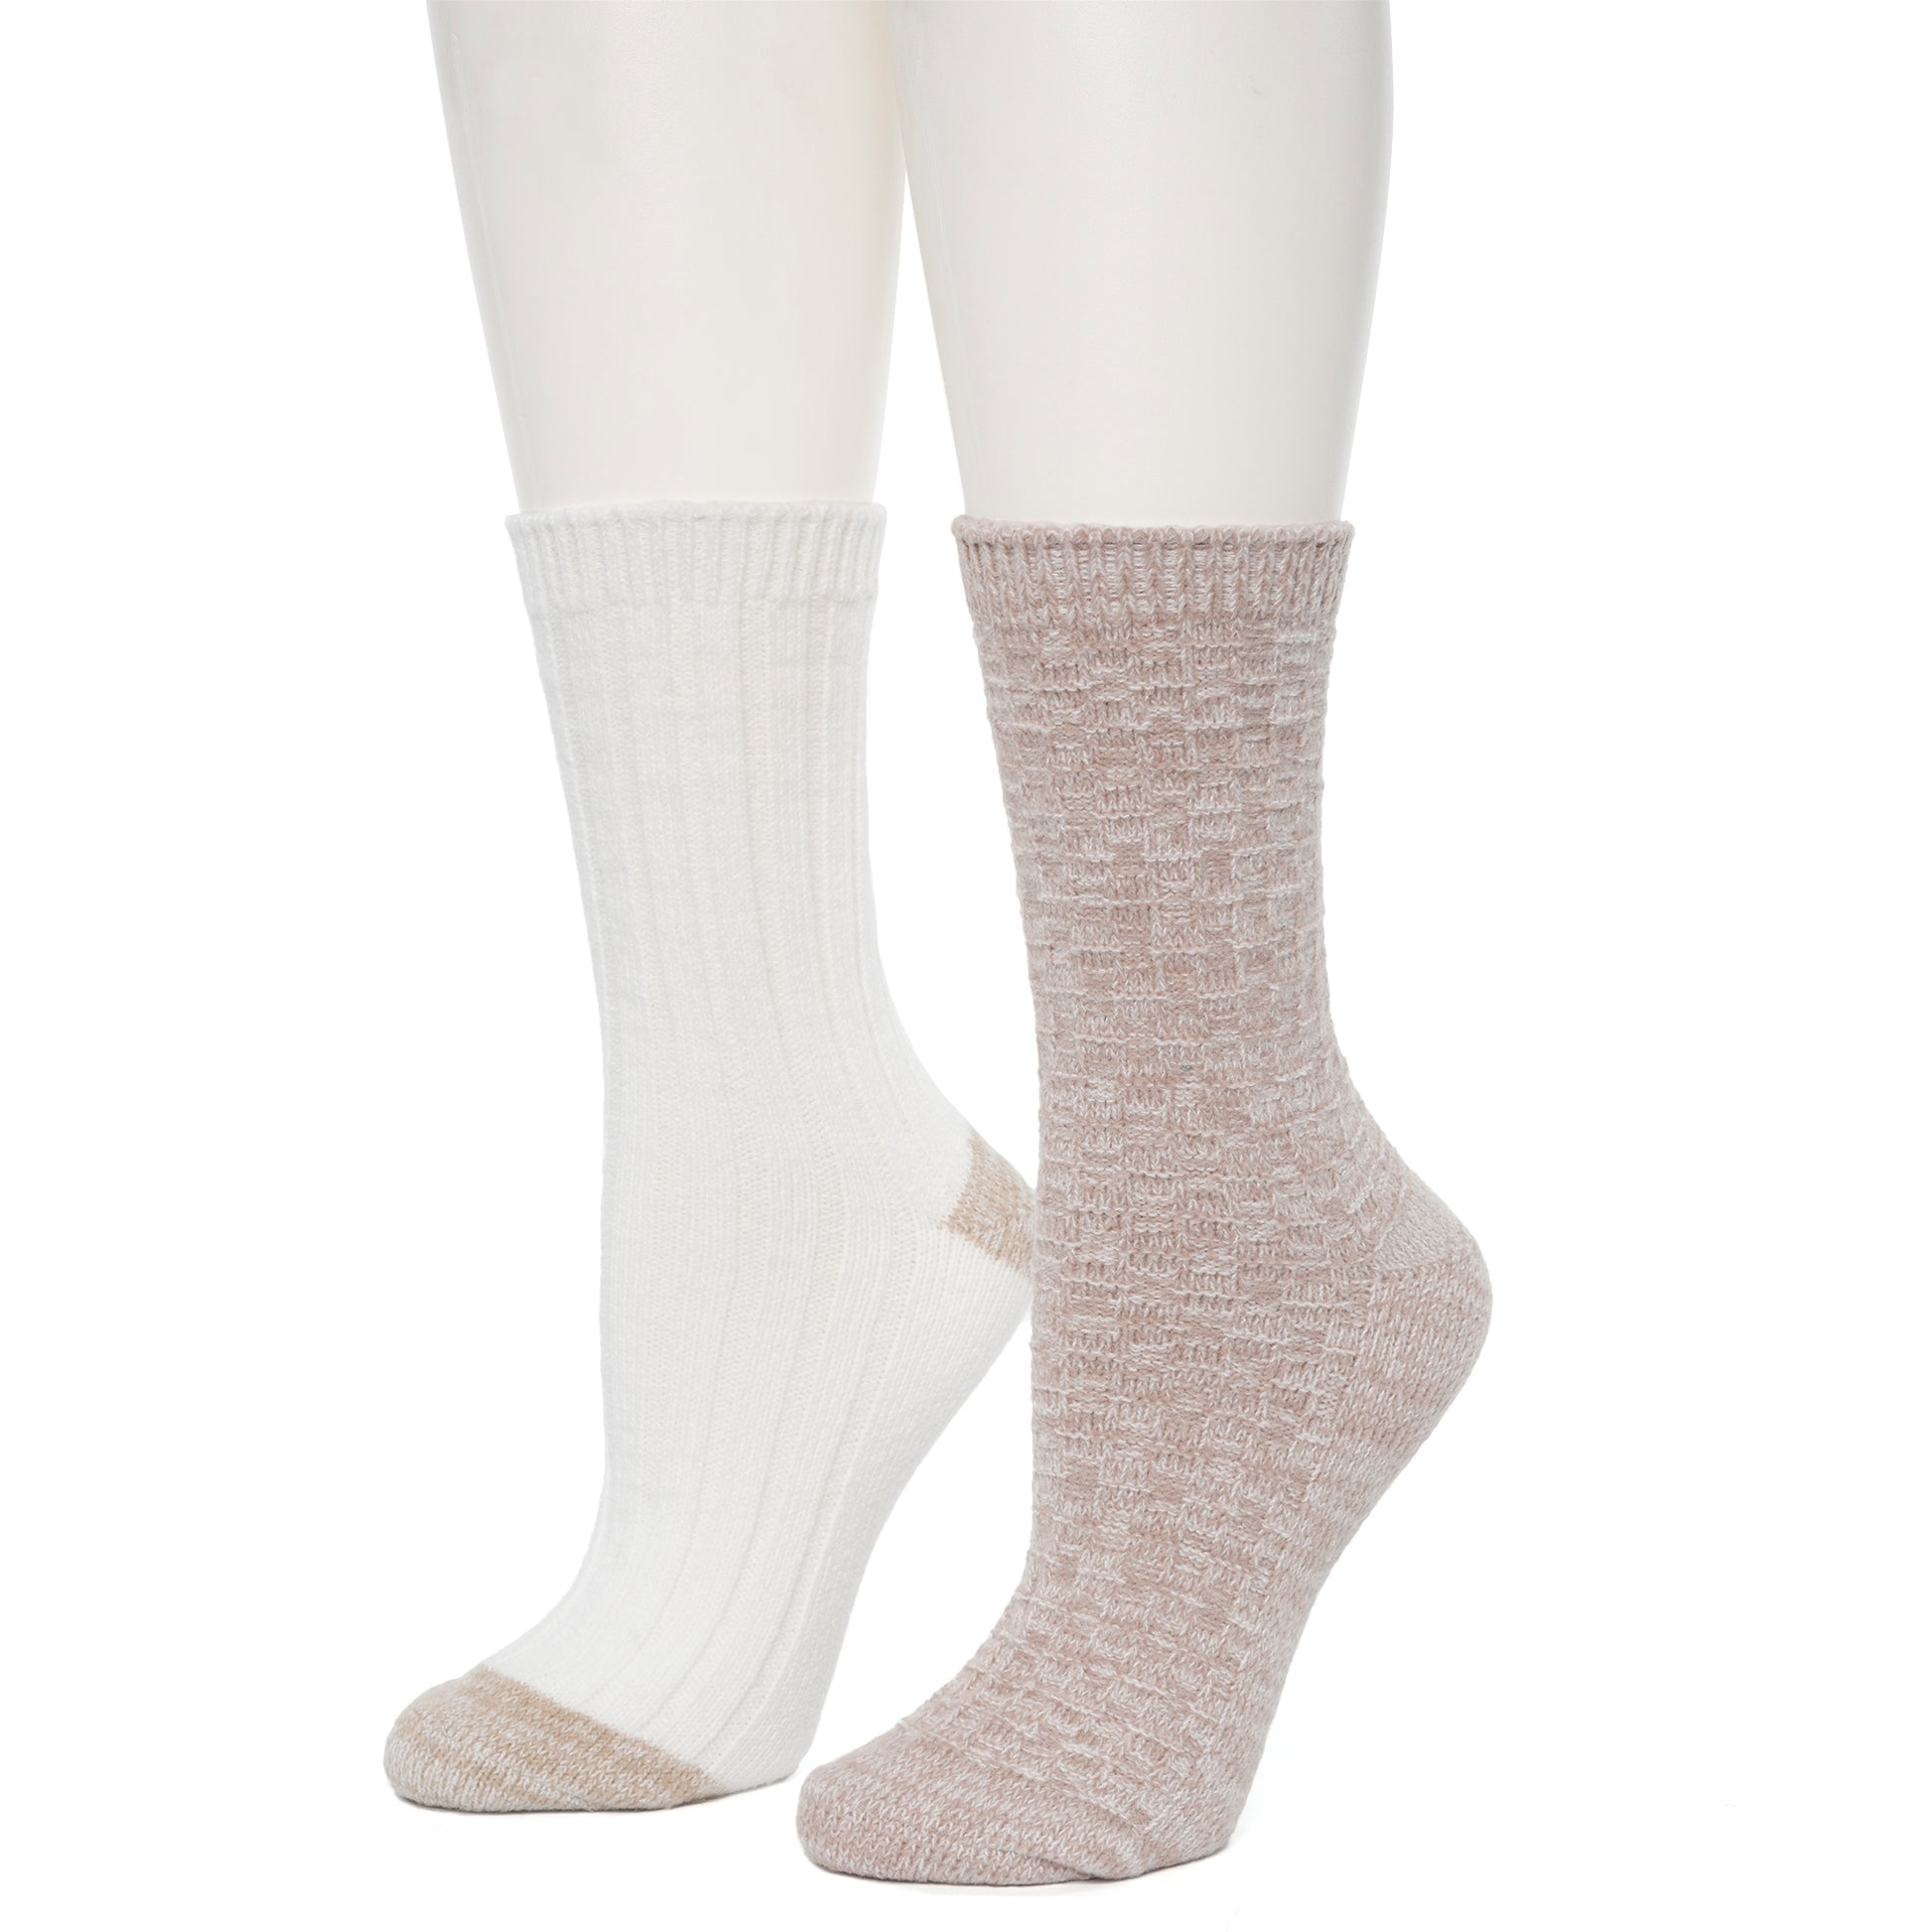 Simply Taupe;@Spacedye Wheat Texture/Rib Crew Sock 2 Pack